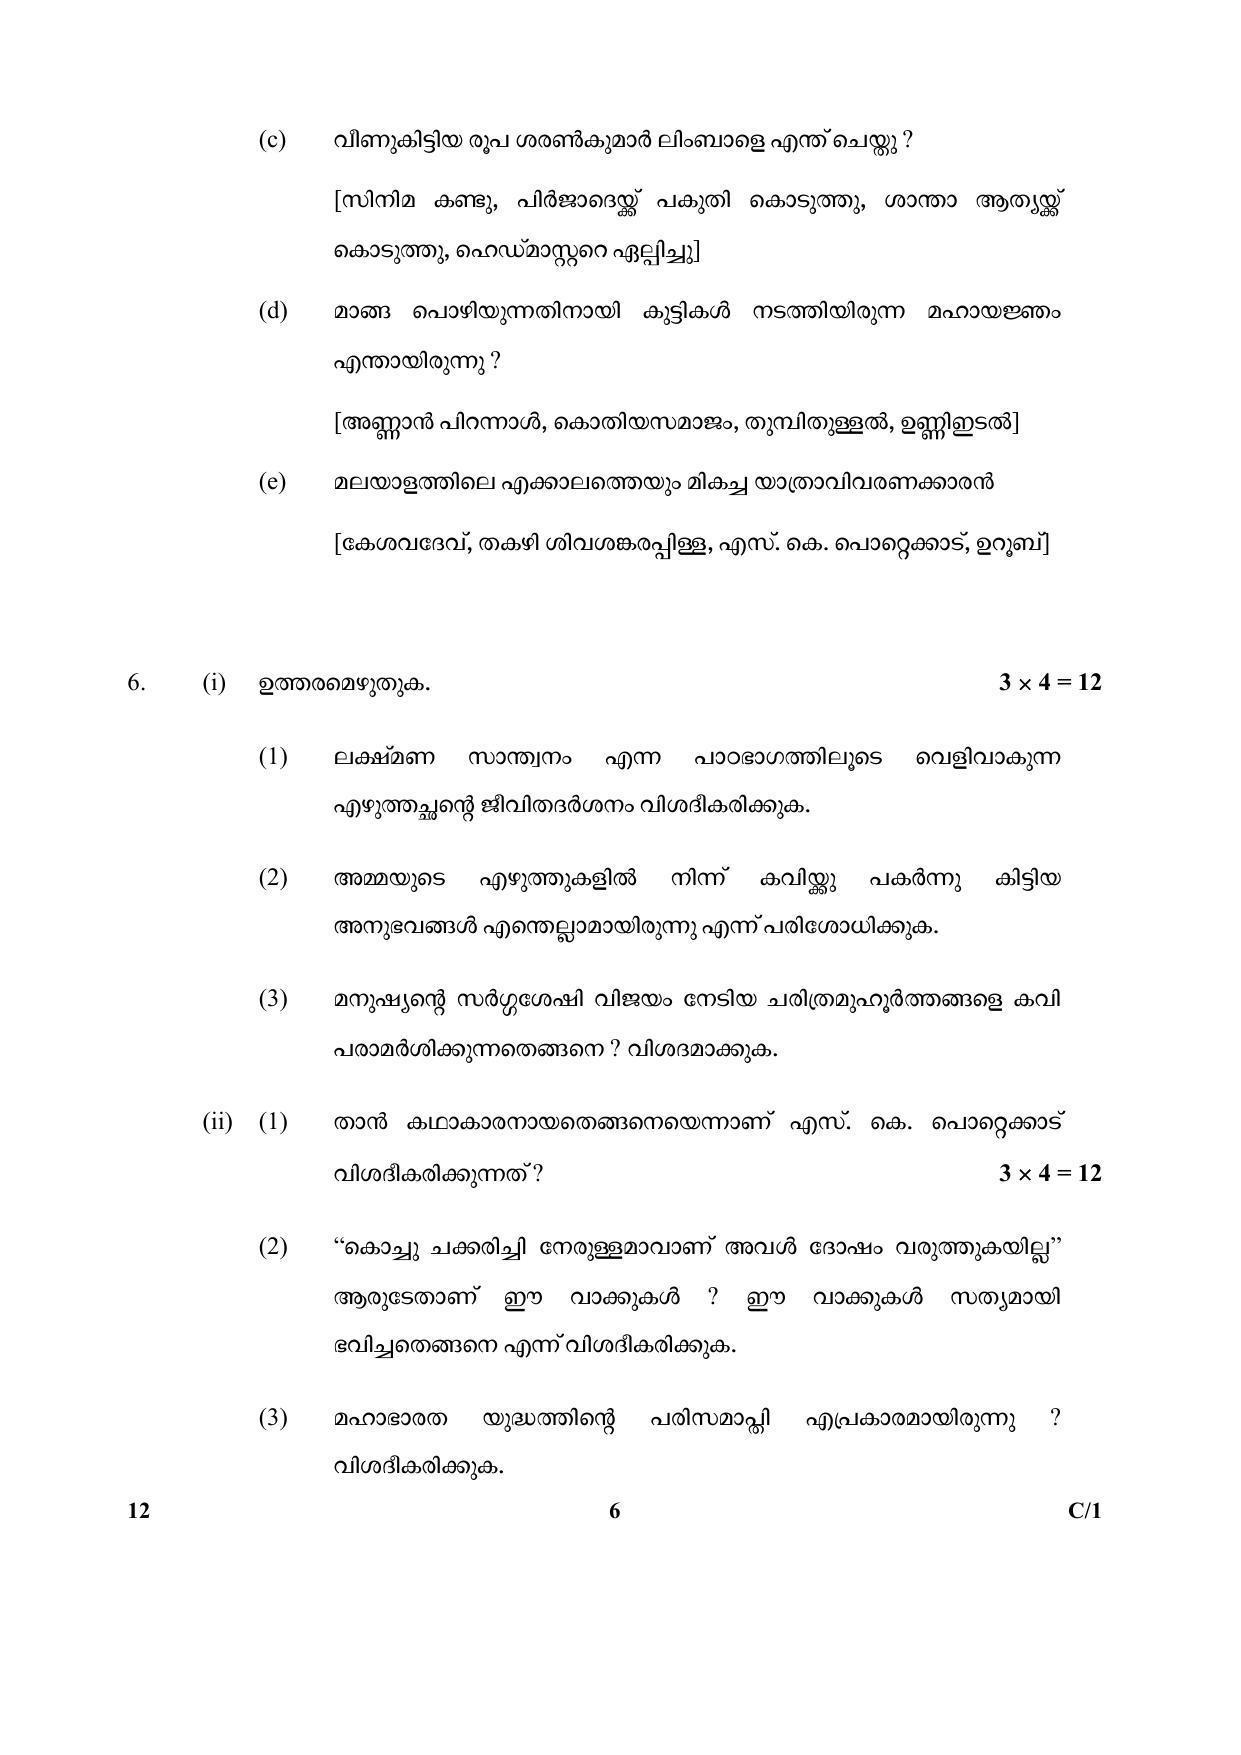 CBSE Class 10 12 (Malayalam) 2018 Compartment Question Paper - Page 6